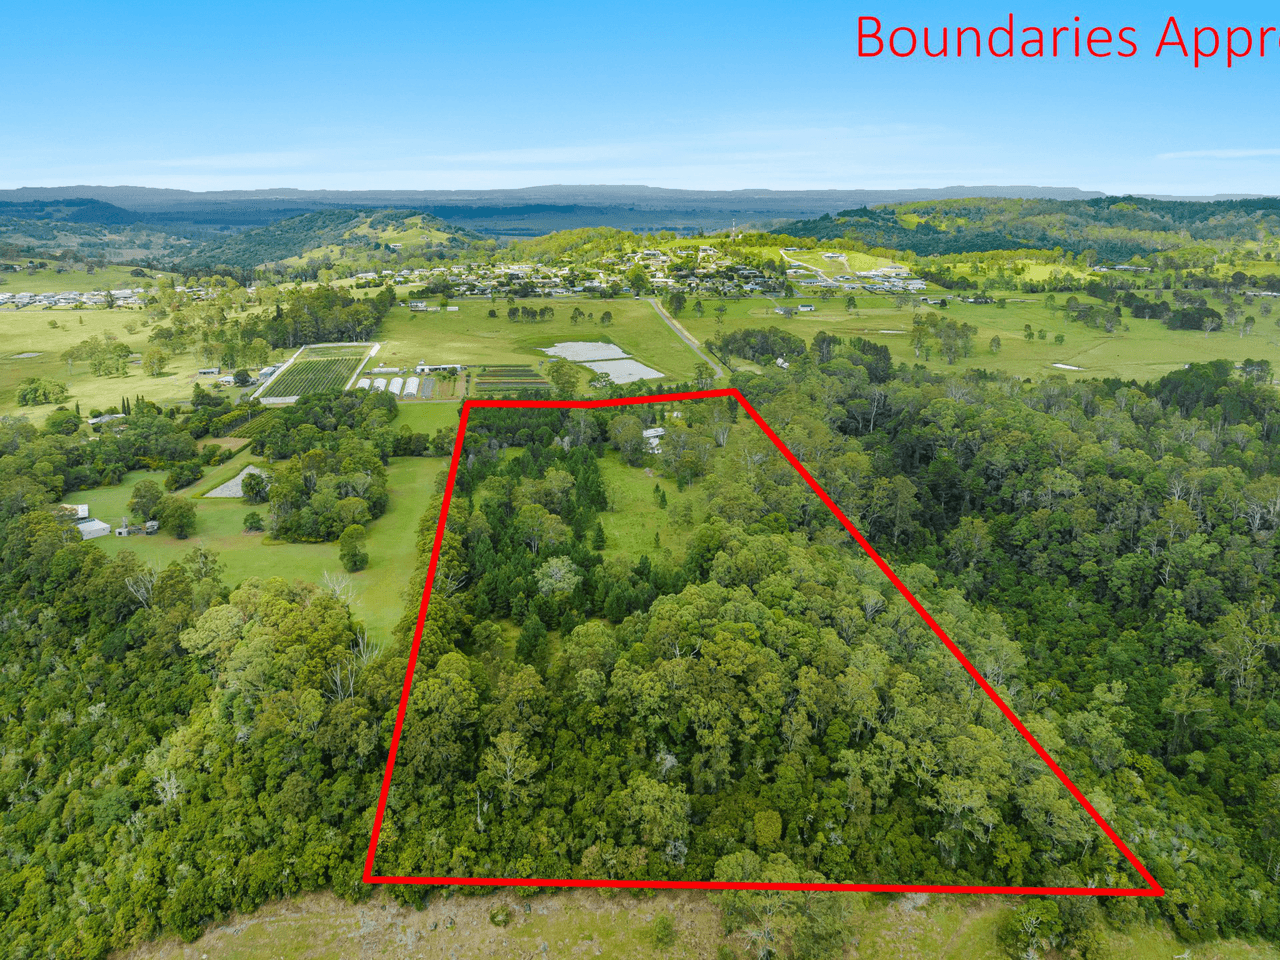 43 Struthers Road, CANIABA, NSW 2480